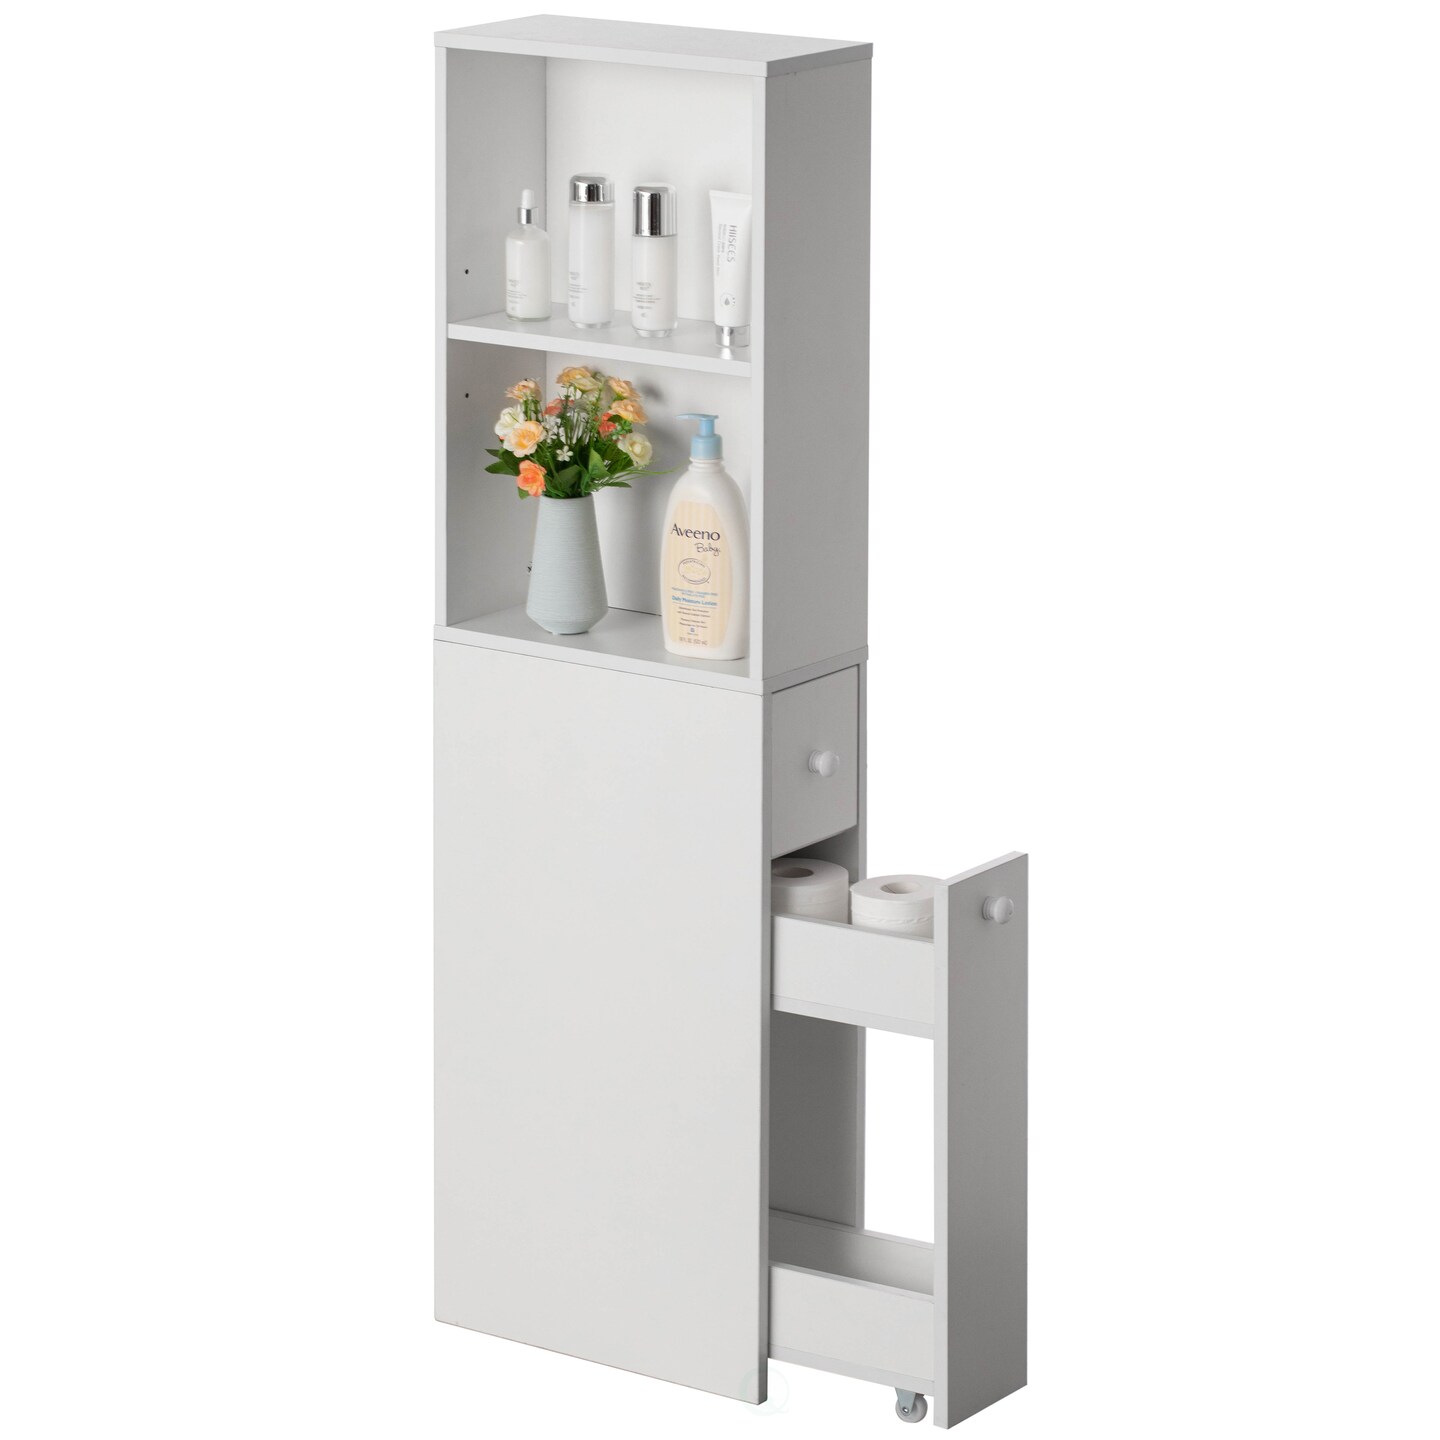 Freestanding Narrow and Slim Design White Bathroom Storage Cabinet - Ideal as Toilet Paper Storage, Feminine Product Organizer or Hair Tool Organizer with Storage Drawer and Adjustable Shelf